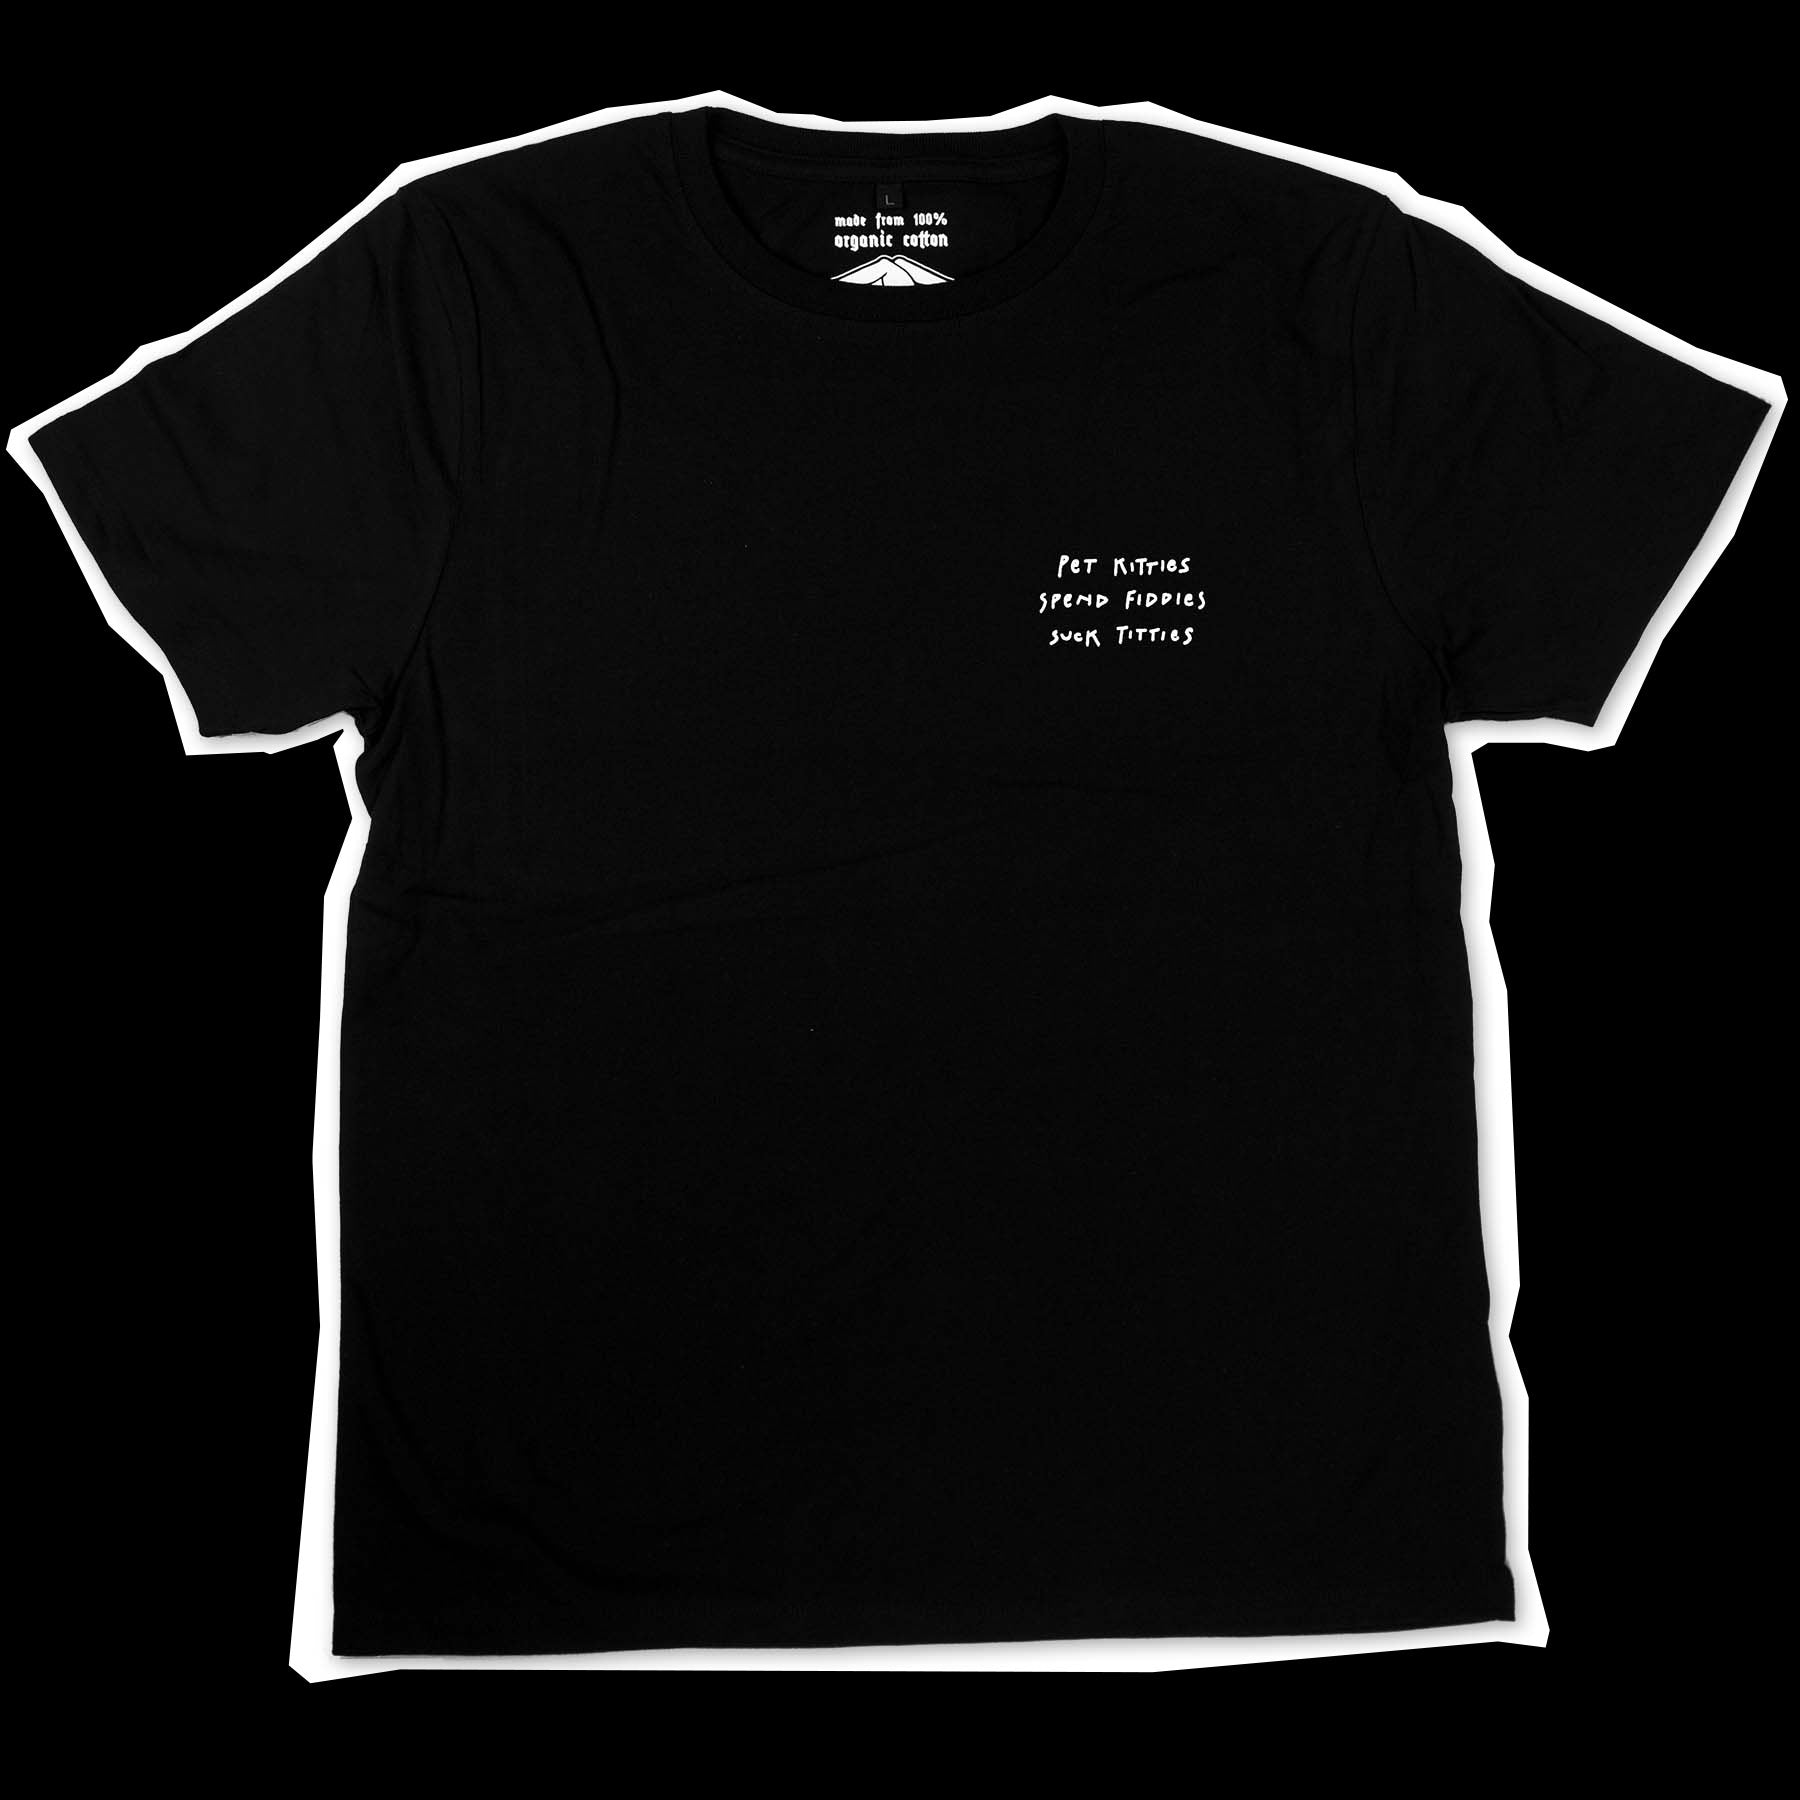 Black t-shirt with the text "pet kitties, spend fiddies, suck titties" screen-printed on the left chest in white colour